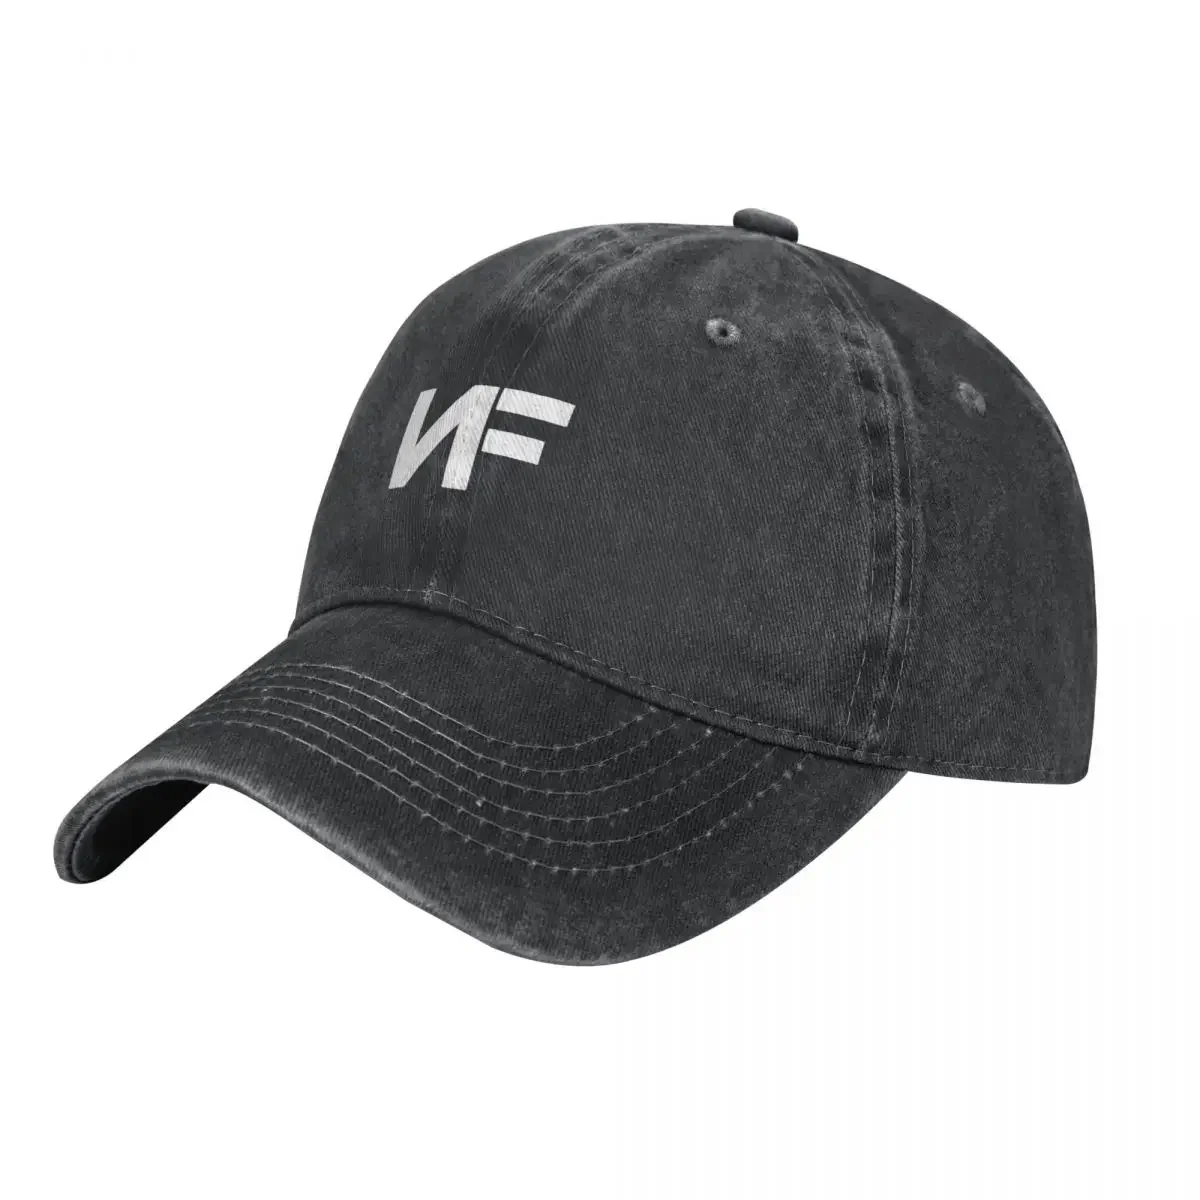 

NF REAL MUSIC MERCH Cowboy Hat New In Hat Golf Horse Hat fishing Mens Tennis Women's